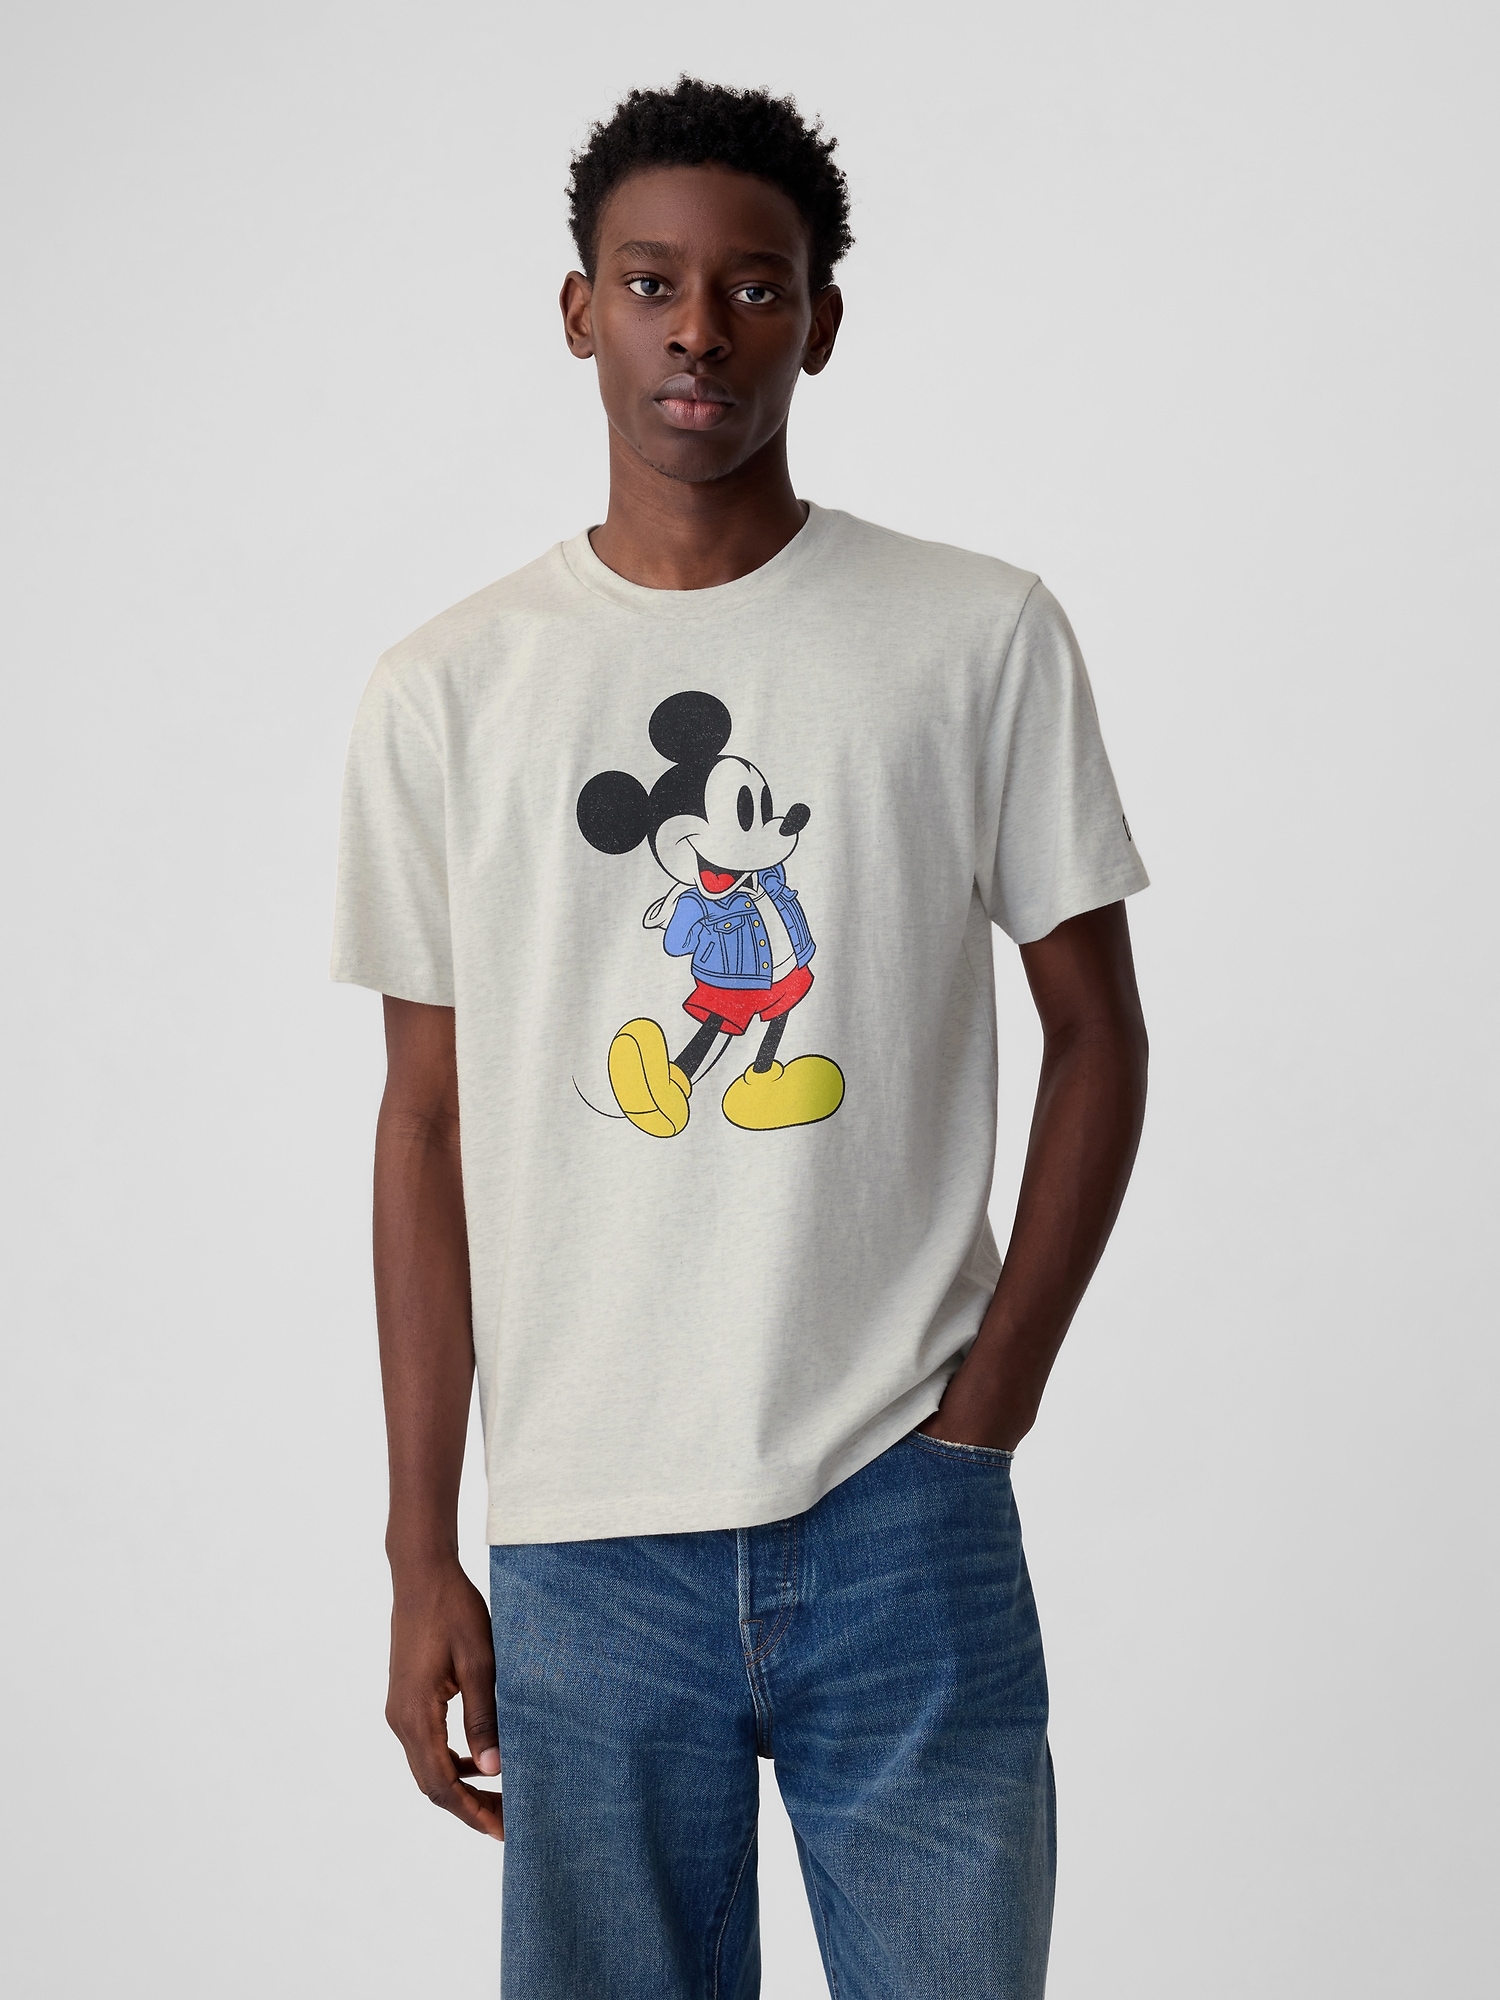 Gap Disney Mickey Mouse Graphic T-Shirt